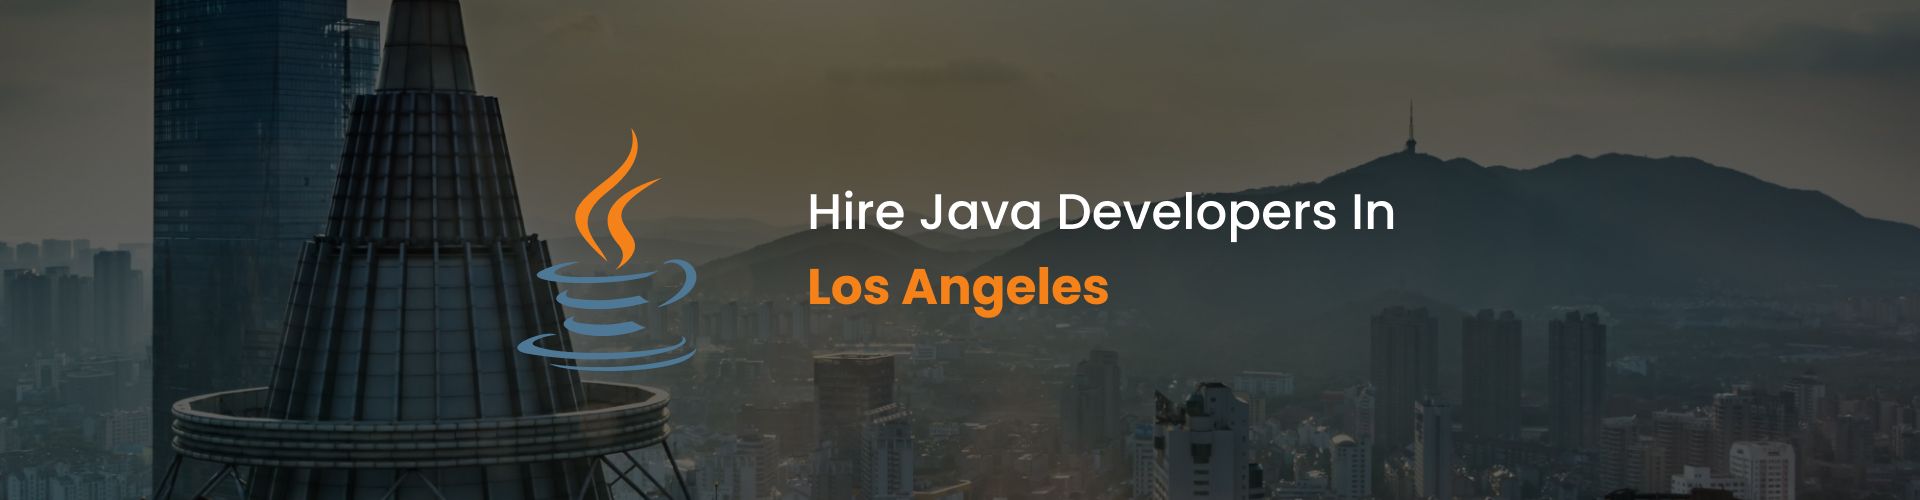 hire java developers in los angeles